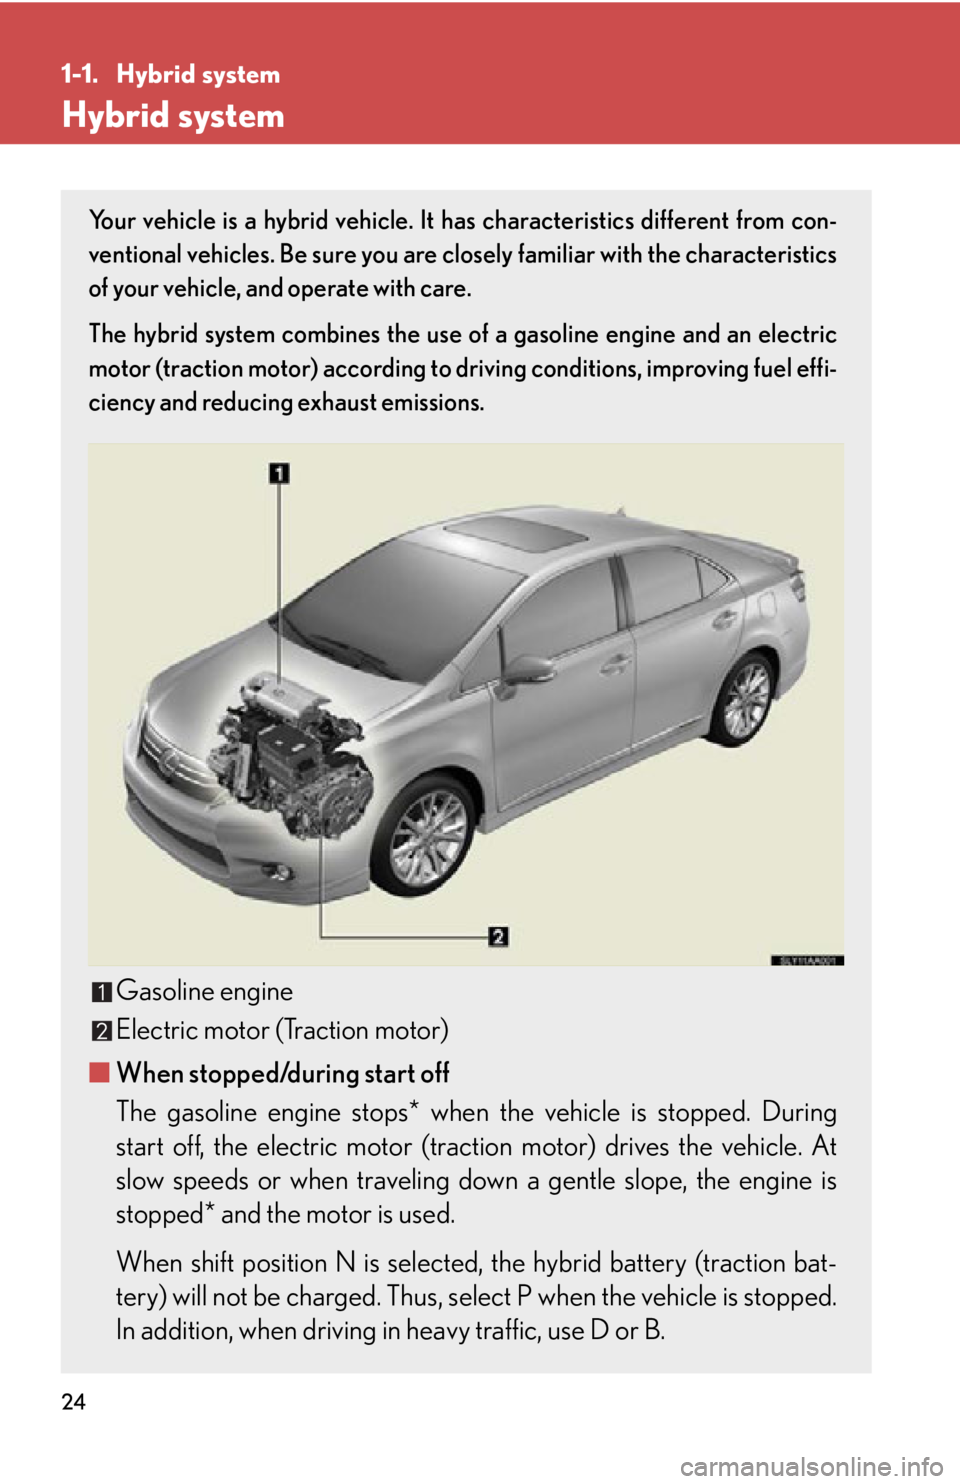 Lexus HS250h 2011  Do-it-yourself maintenance / LEXUS 2011 HS250H OWNERS MANUAL (OM75037U) 24
1-1. Hybrid system
Hybrid system
Your vehicle is a hybrid vehicle. It has characteristics different from con-
ventional vehicles. Be sure you are clos ely familiar with the characteristics
of your 